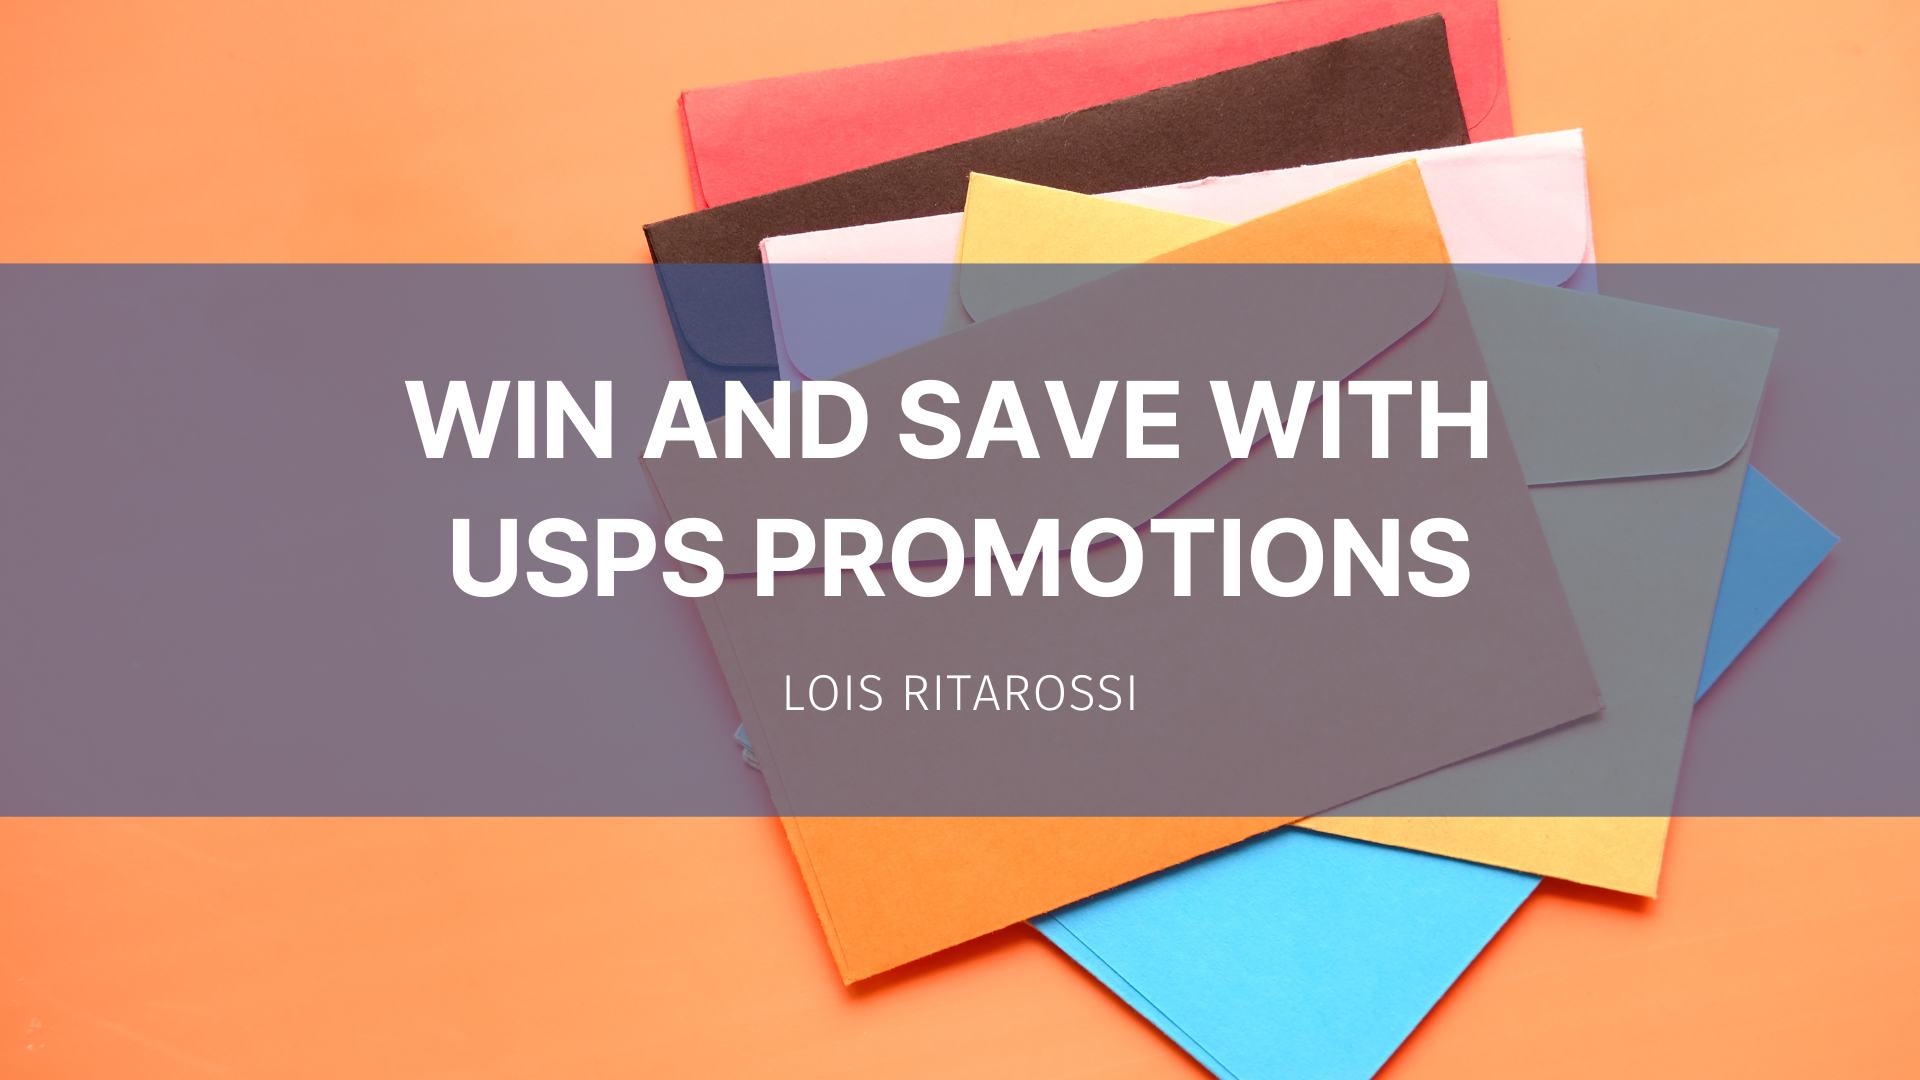 Featured image for “Win and save with USPS Promotions”